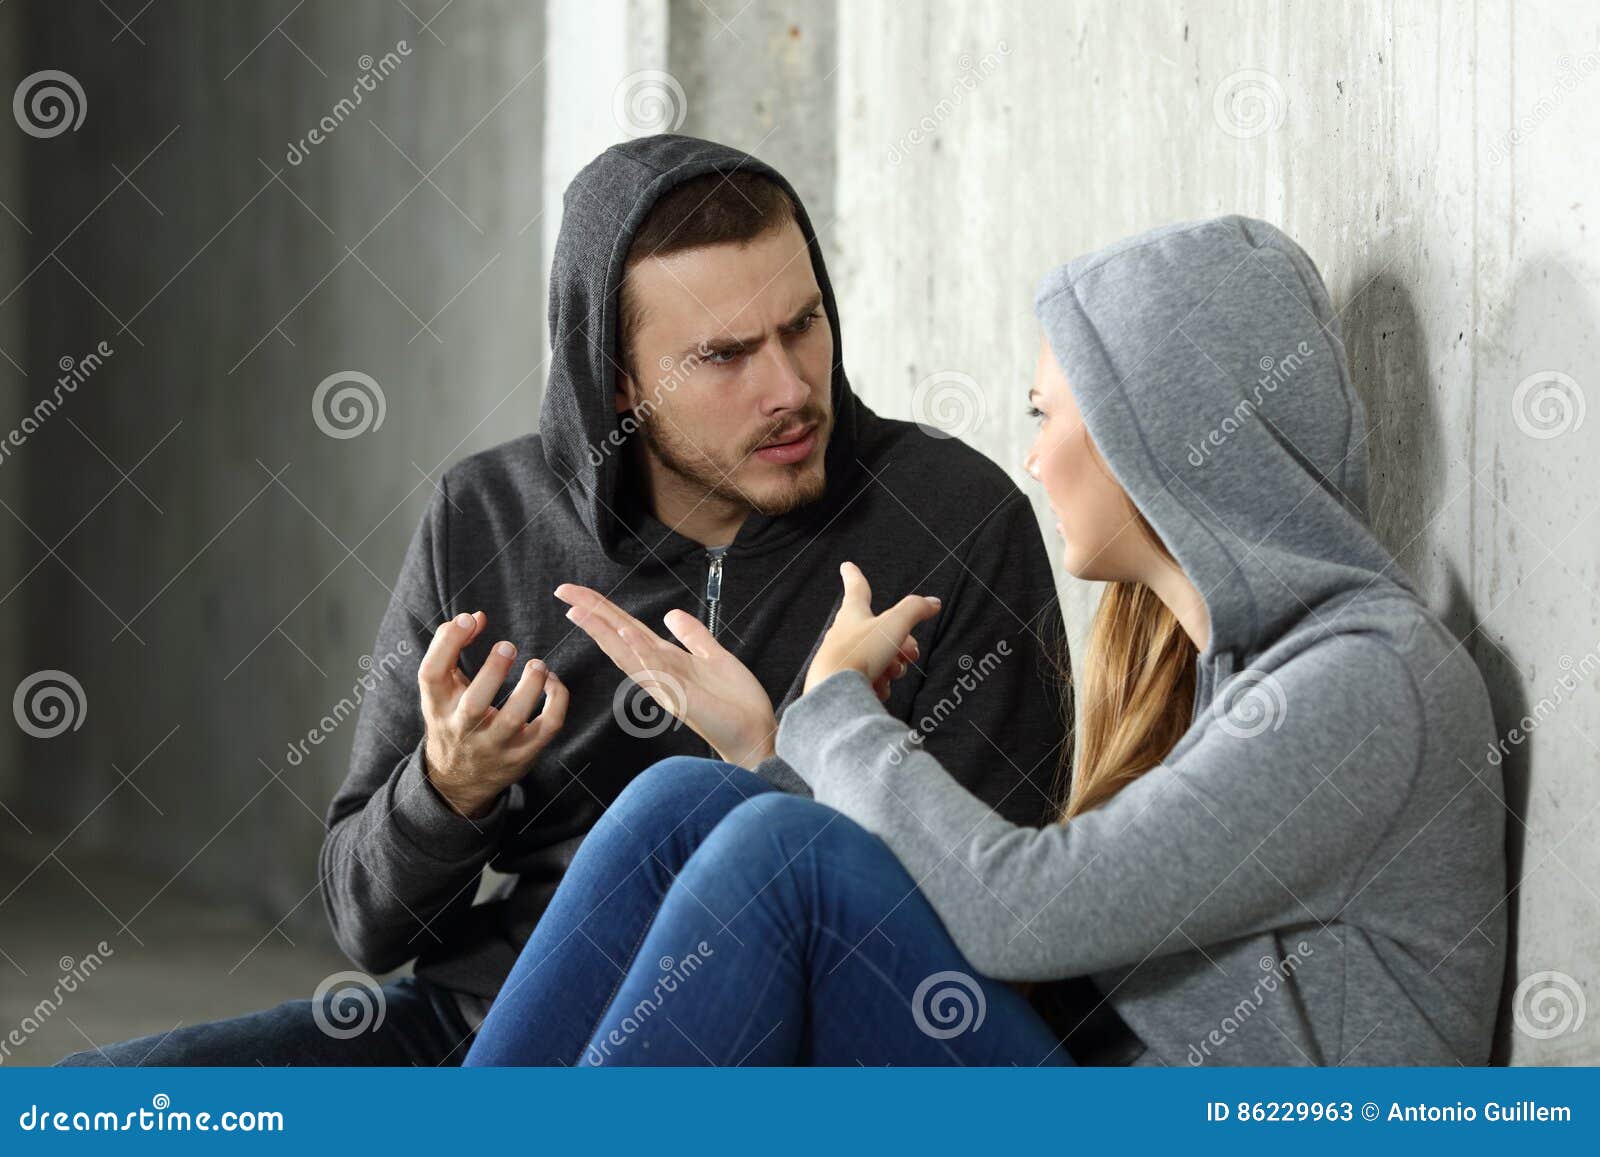 couple of teenagers arguing in a dark place